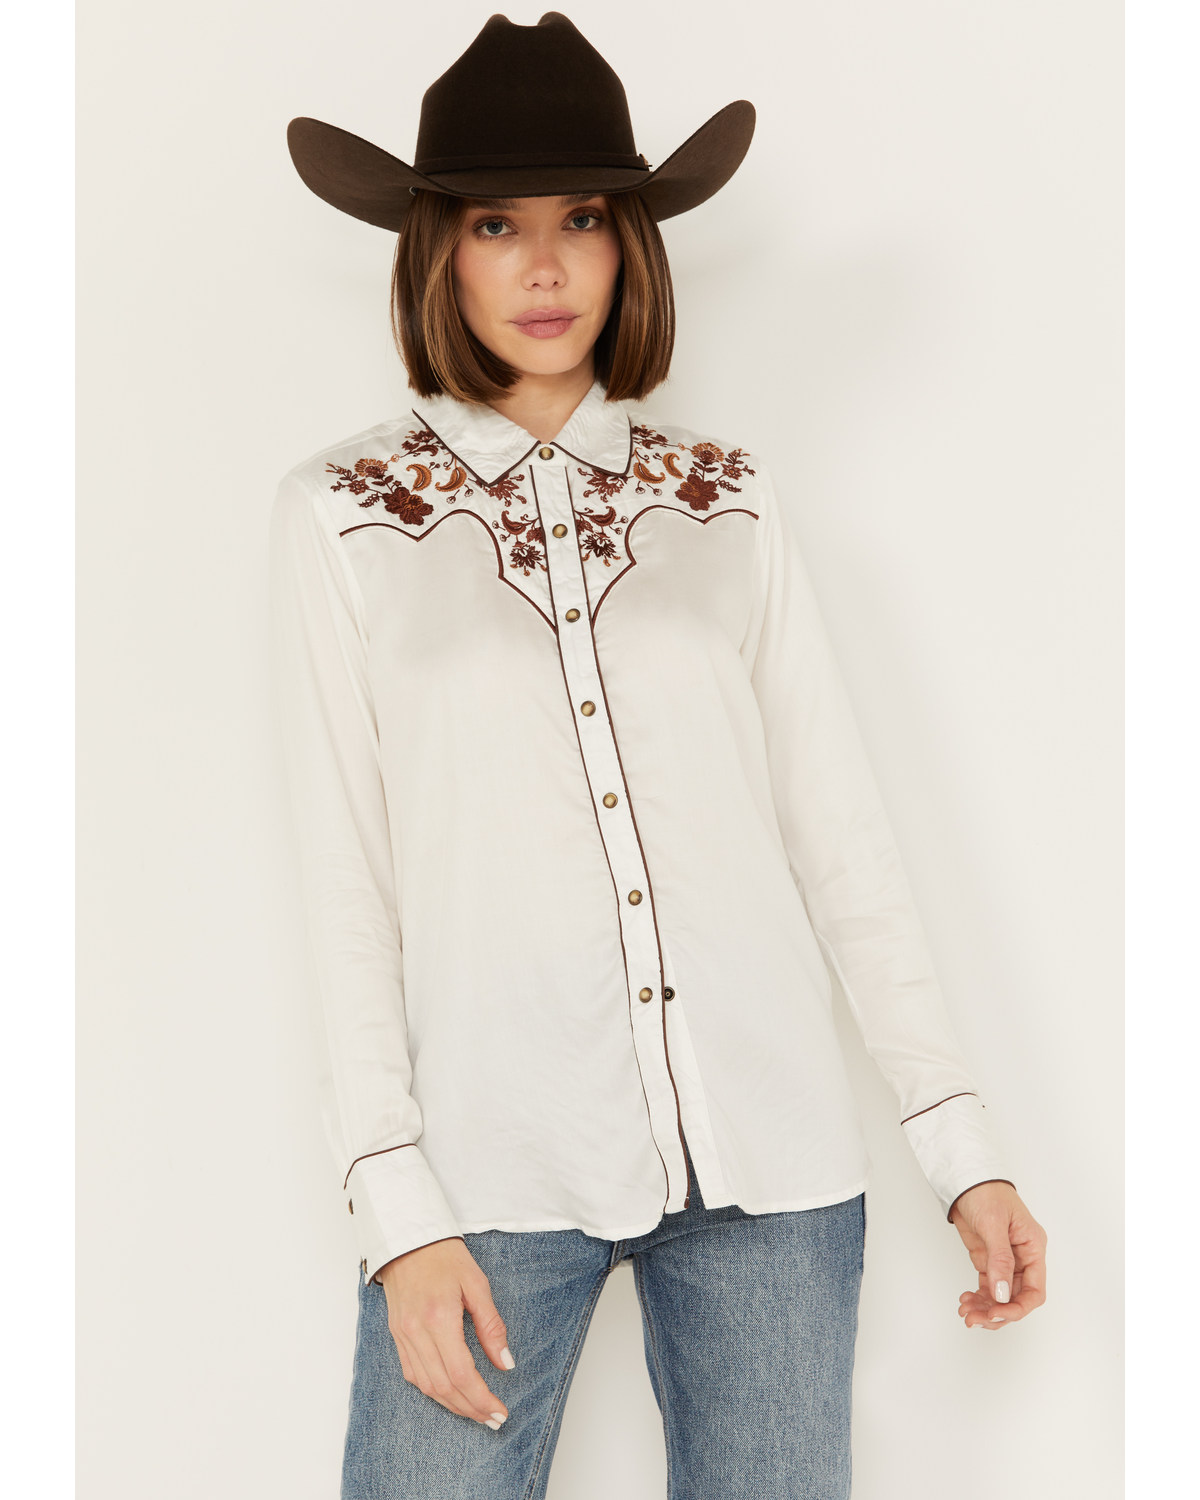 Ariat Women's Elsa Floral Embroidered Long Sleeve Snap Western Shirt